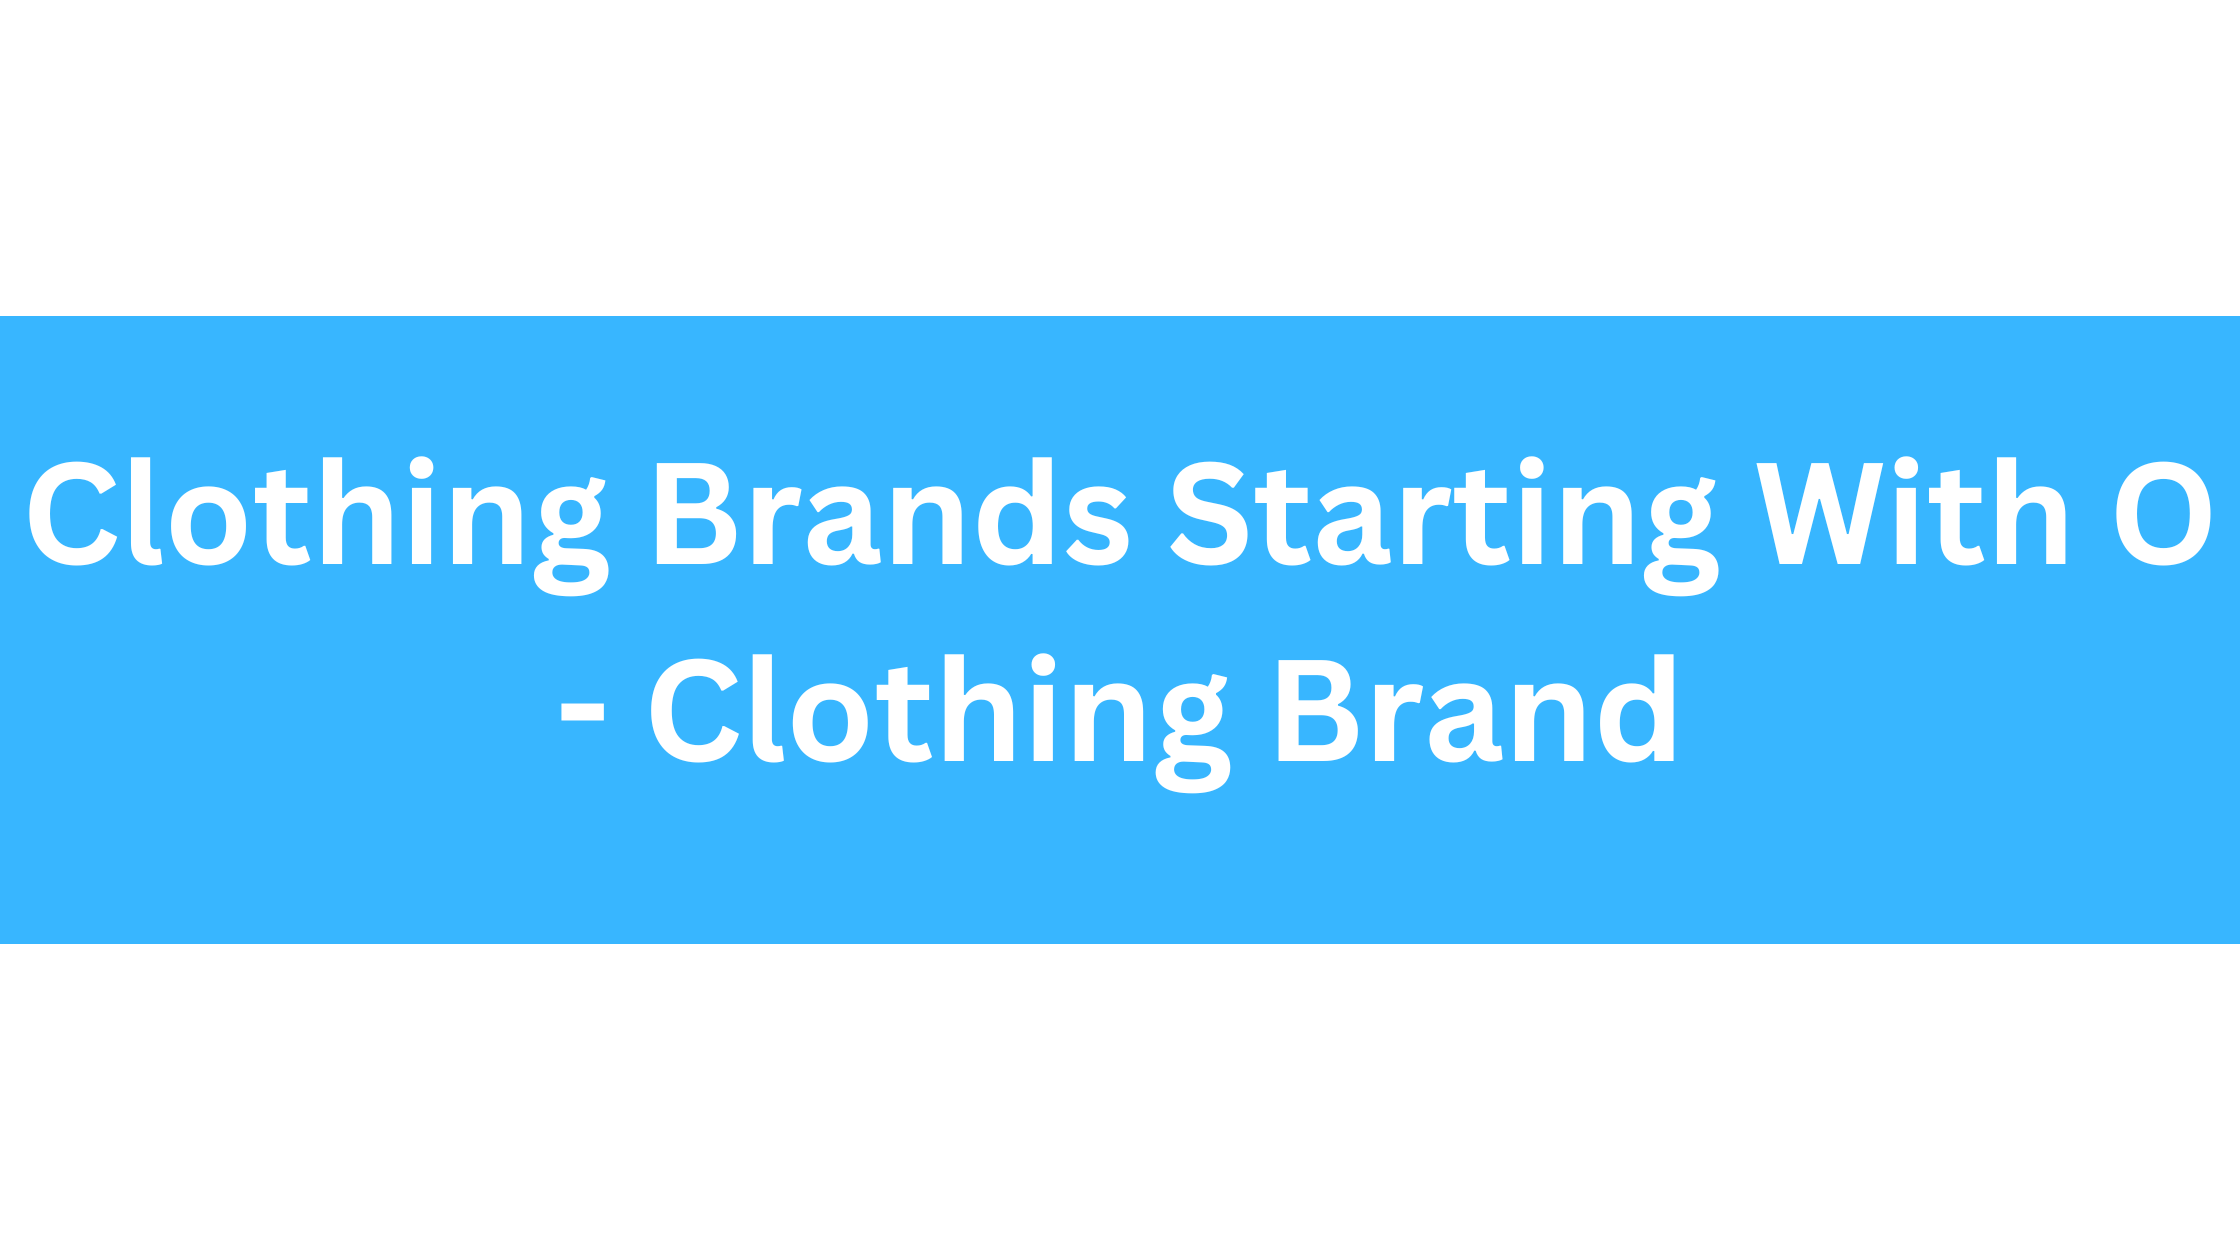 Clothing Brands Starting With O